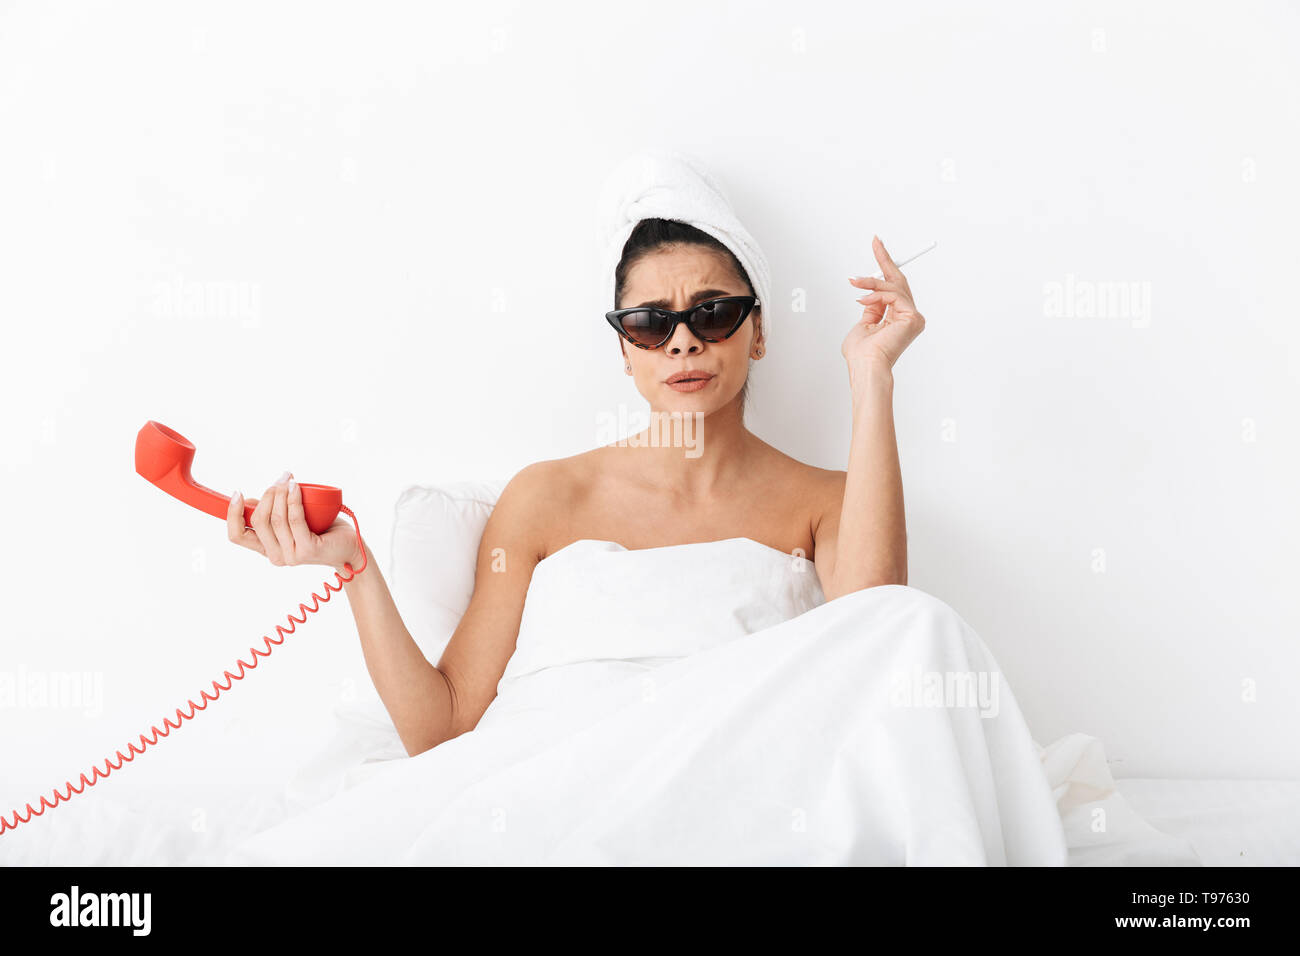 Cheerful young woman sitting in bed after shower wrapped in blanket, wearing sunglasses, smoking, talking on a landline phone Stock Photo